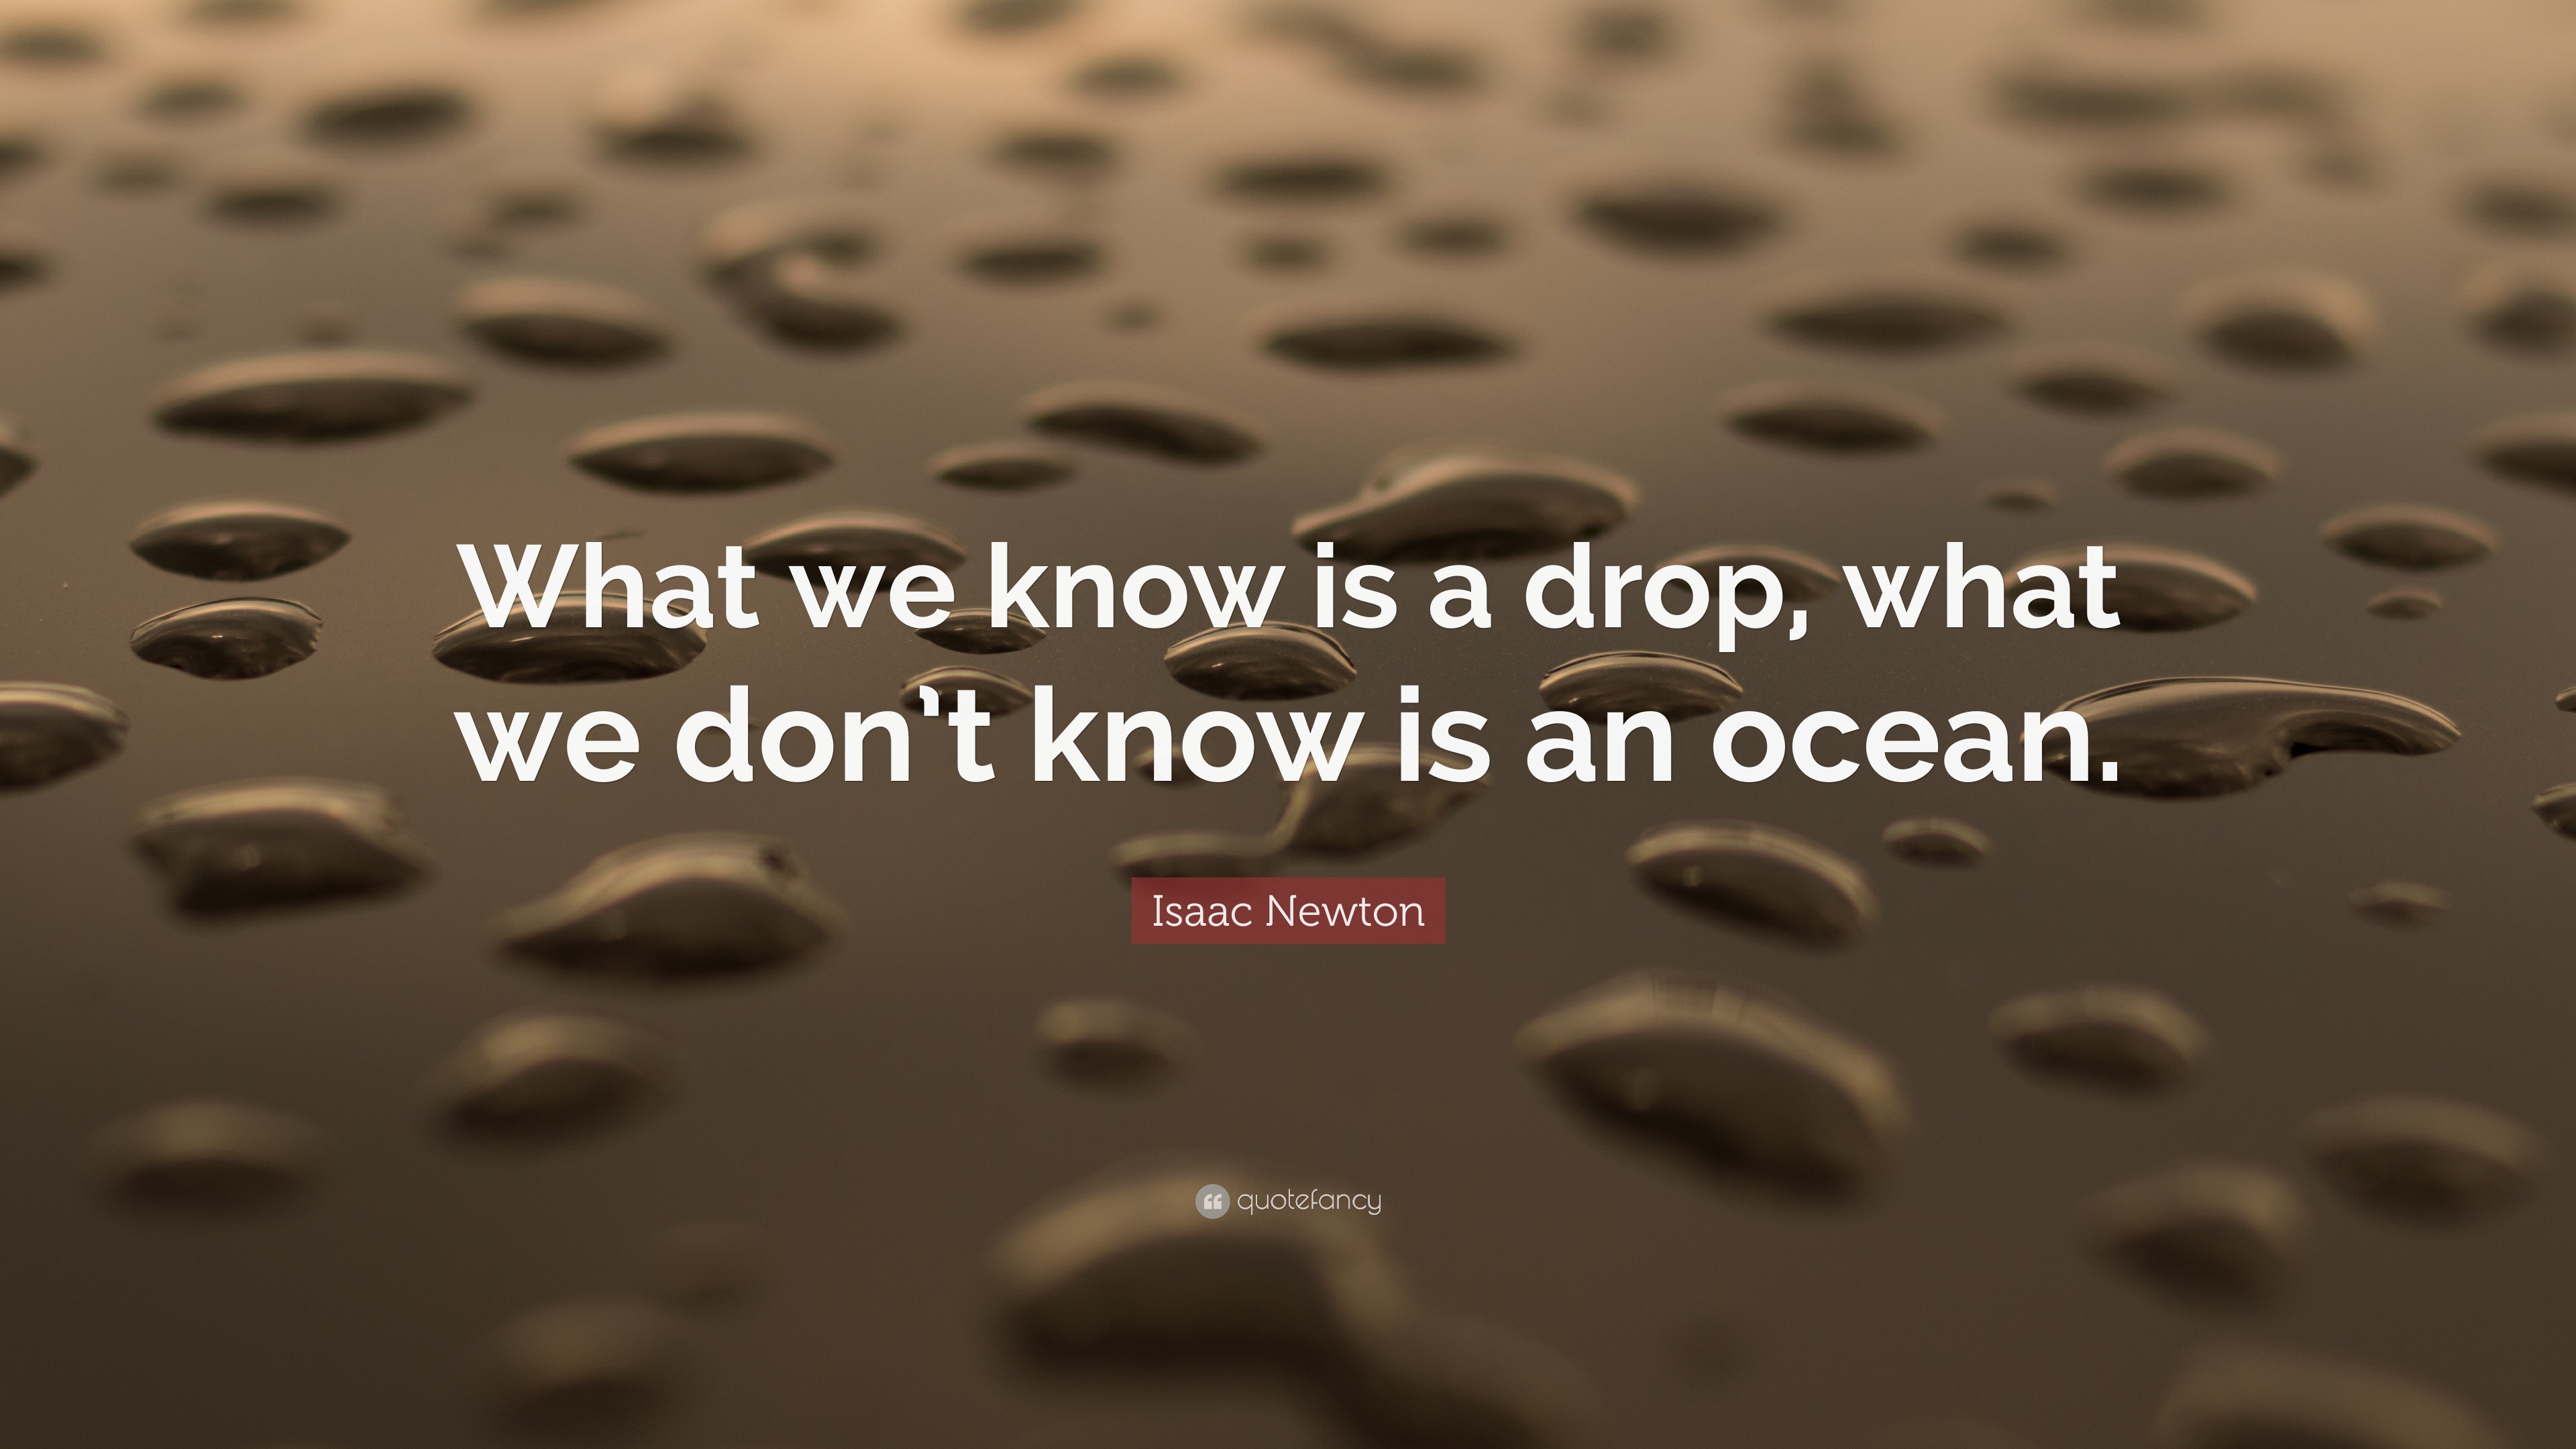 Isaac Newton Quote “what We Know Is A Drop What We Dont Know Is An Ocean” 21 Wallpapers 0706